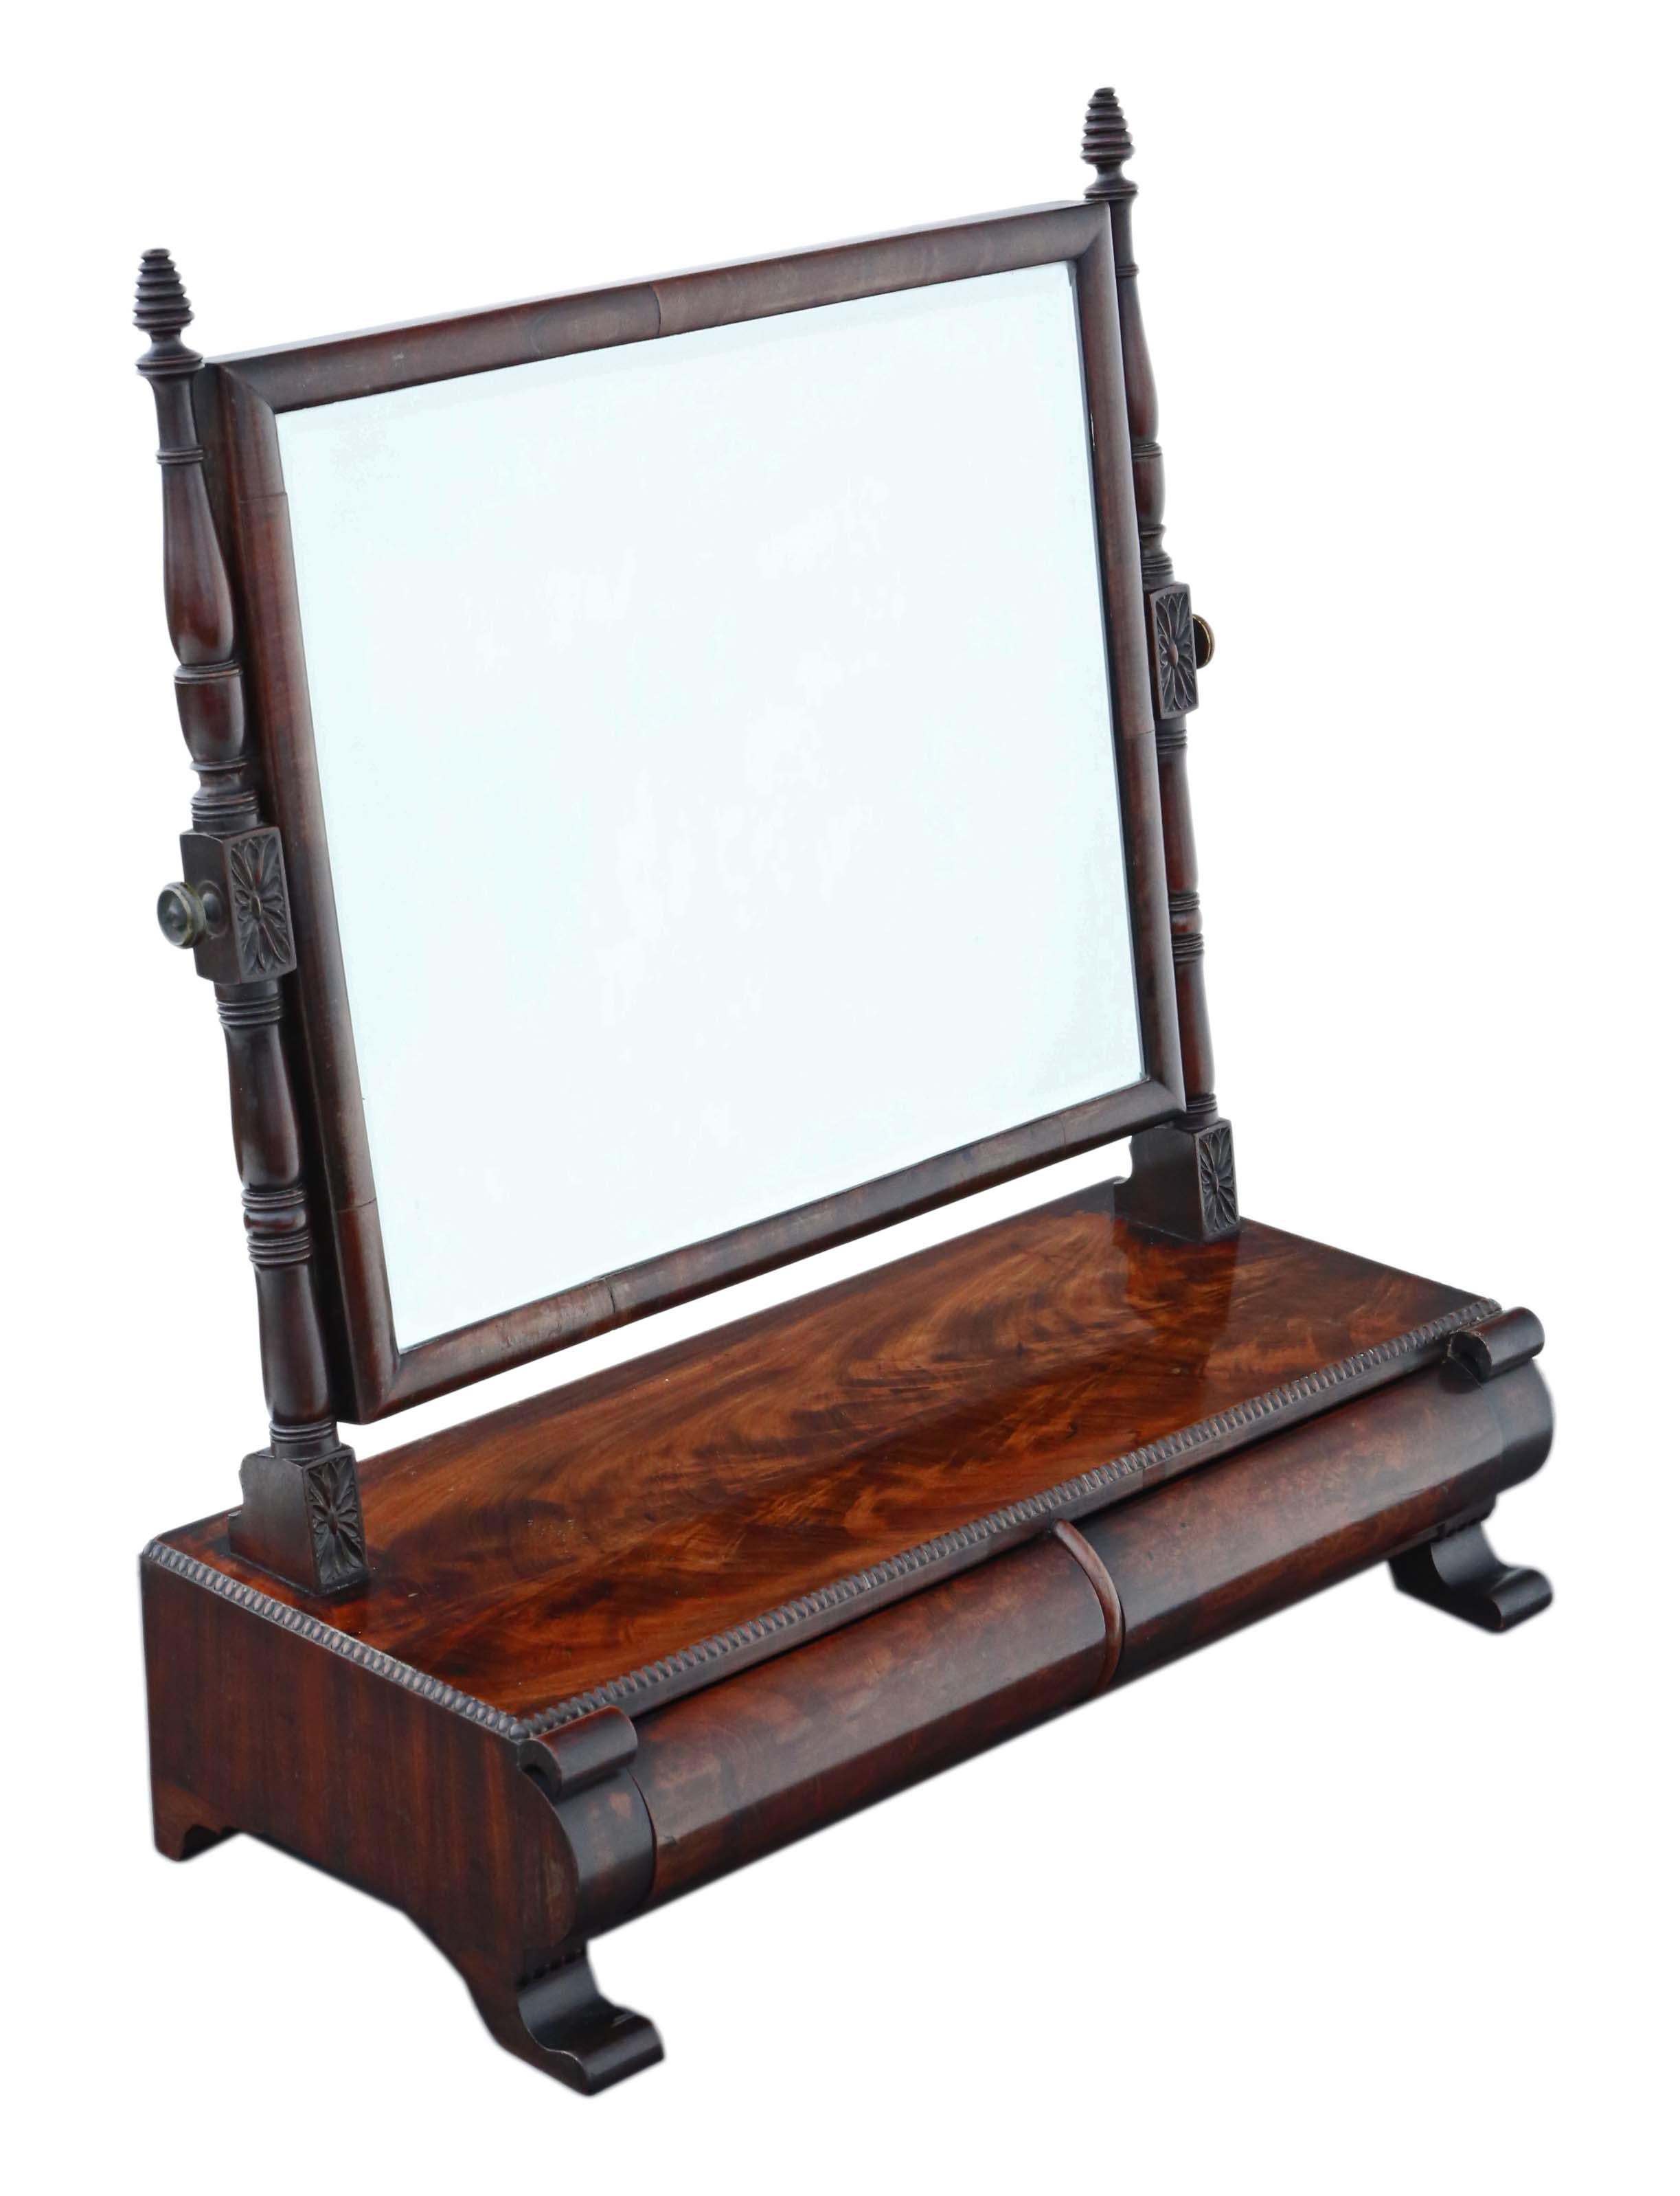 Antique fine quality Georgian circa 1825 mahogany dressing table swing mirror toilet.

This is a lovely mirror, that is full of age and charm, with great proportions.

No loose joints and no woodworm.

A rare find, far better quality than